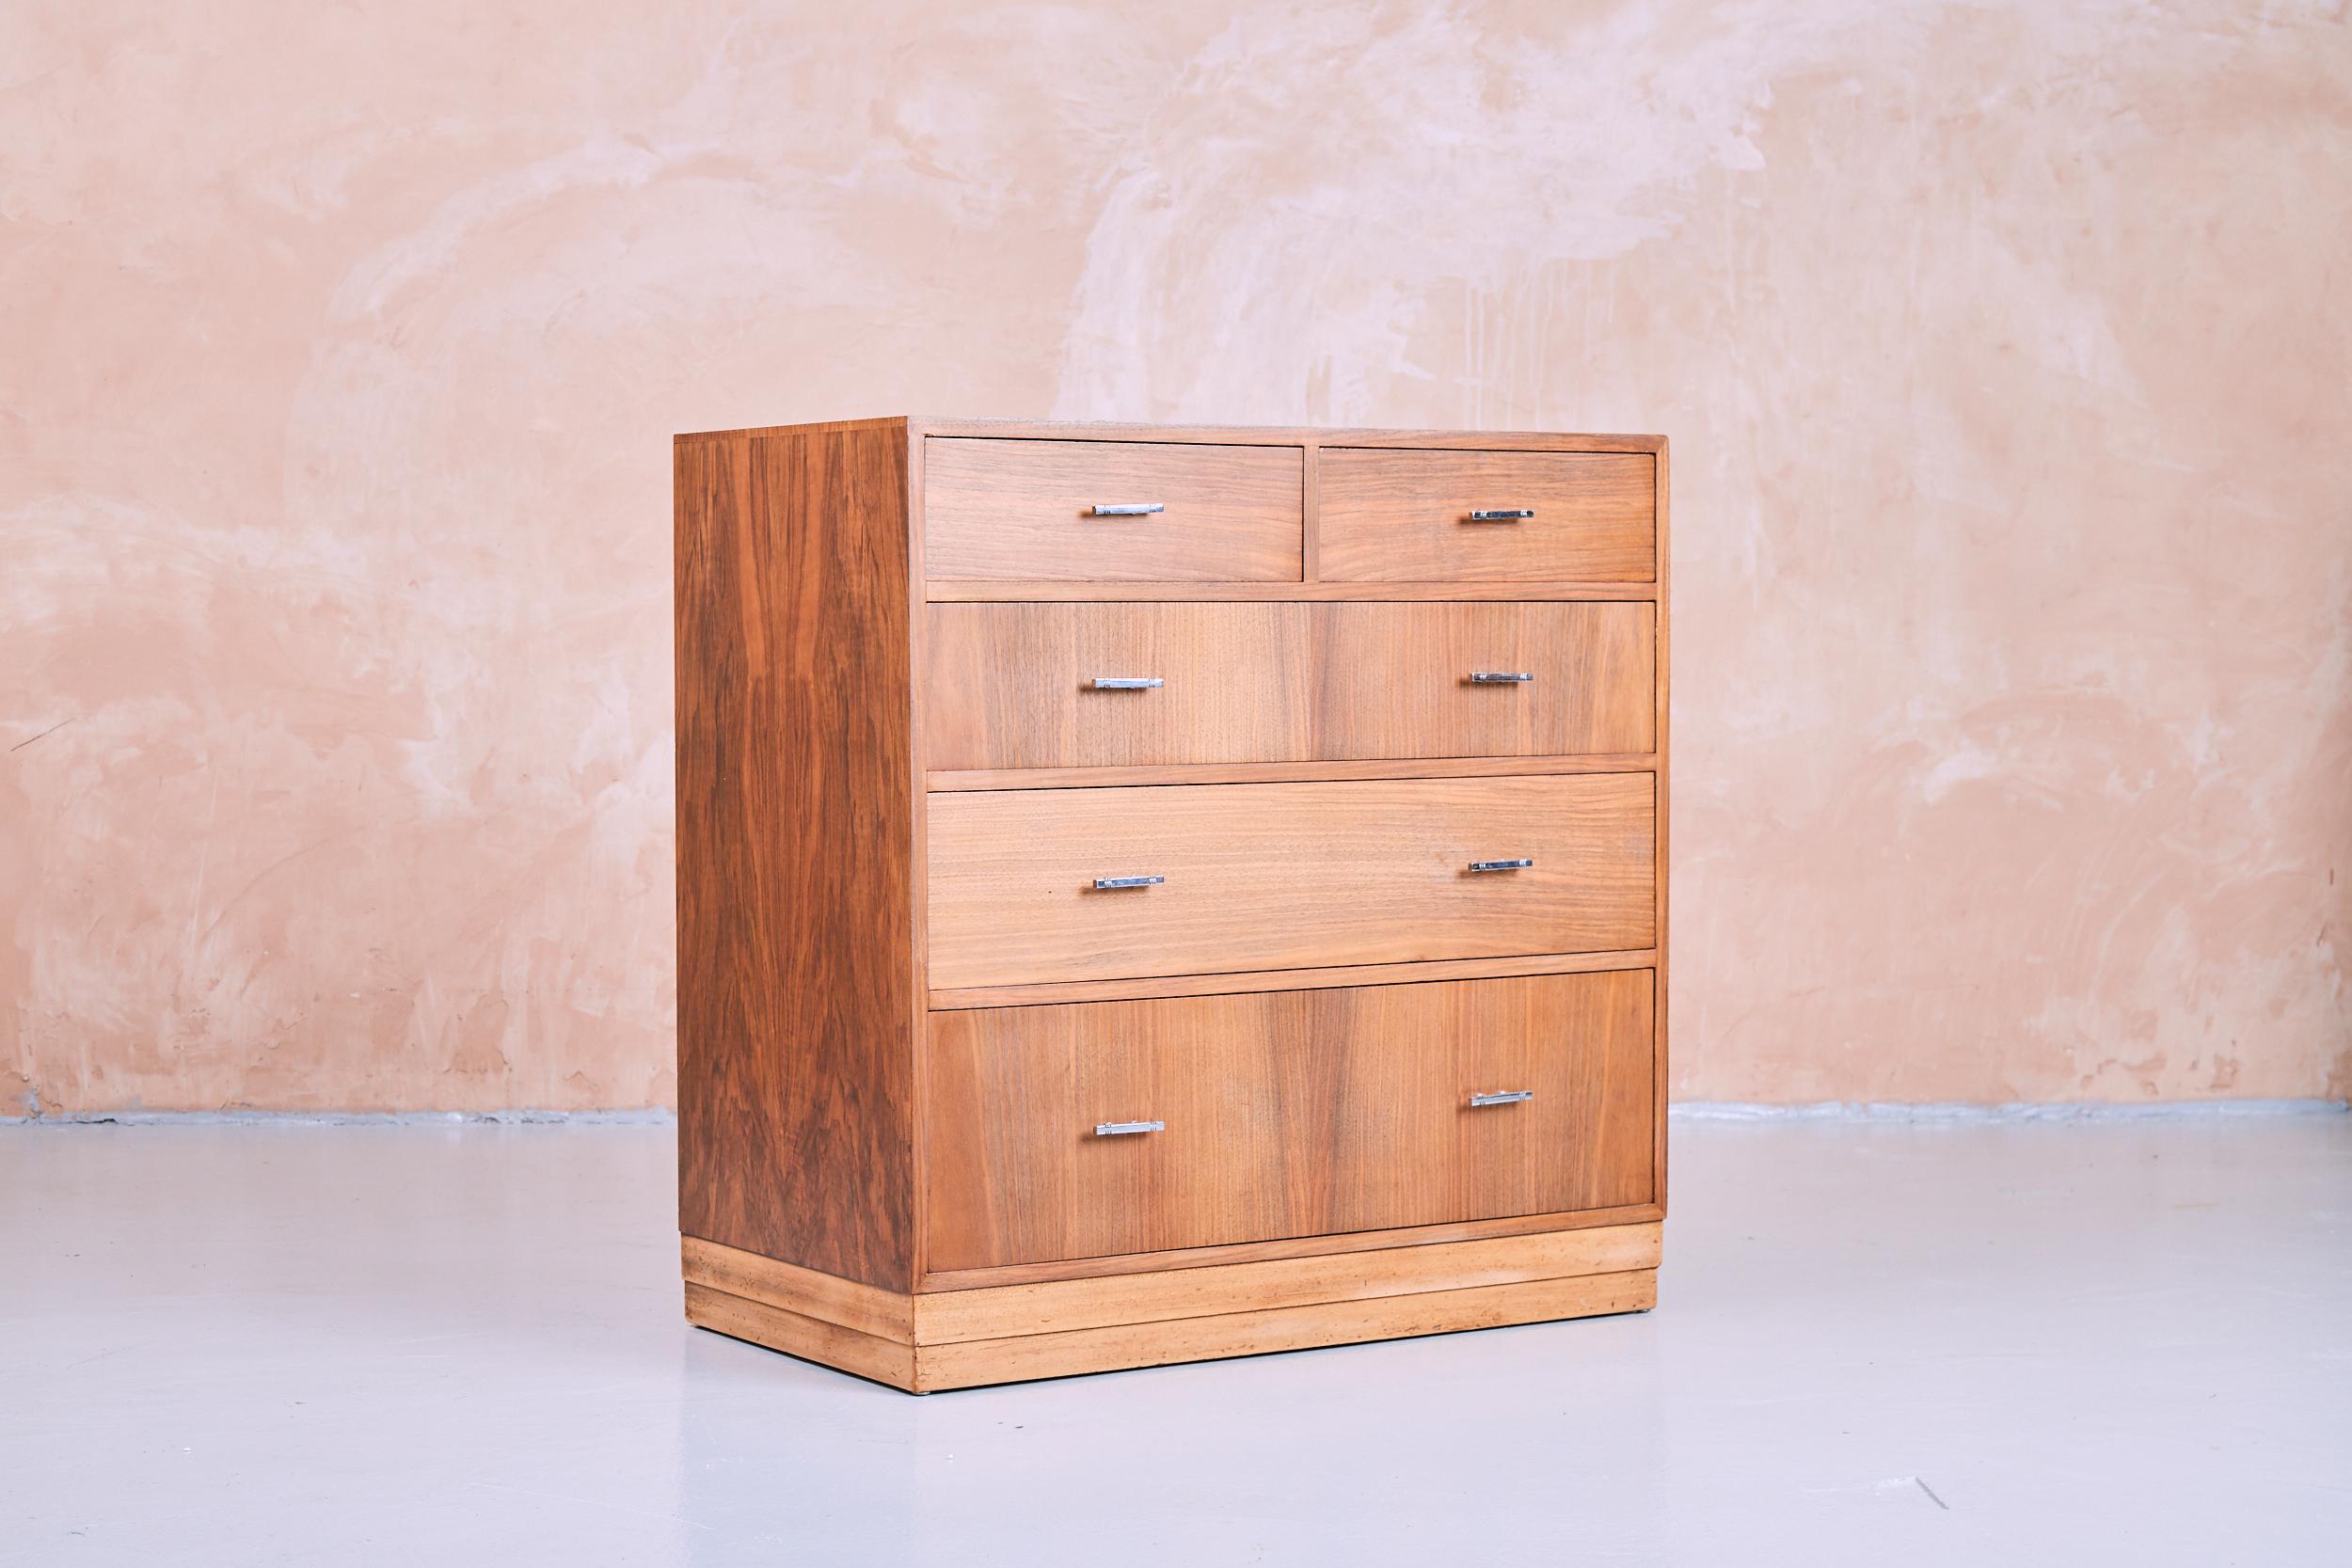 An English four over two walnut chest of drawers, made by the renowned company Hamptons of Pal Mall in London, Hamptons was a fine quality cabinetmaker from this period with good quality dovetail joints good liners all the drawers run smoothly,